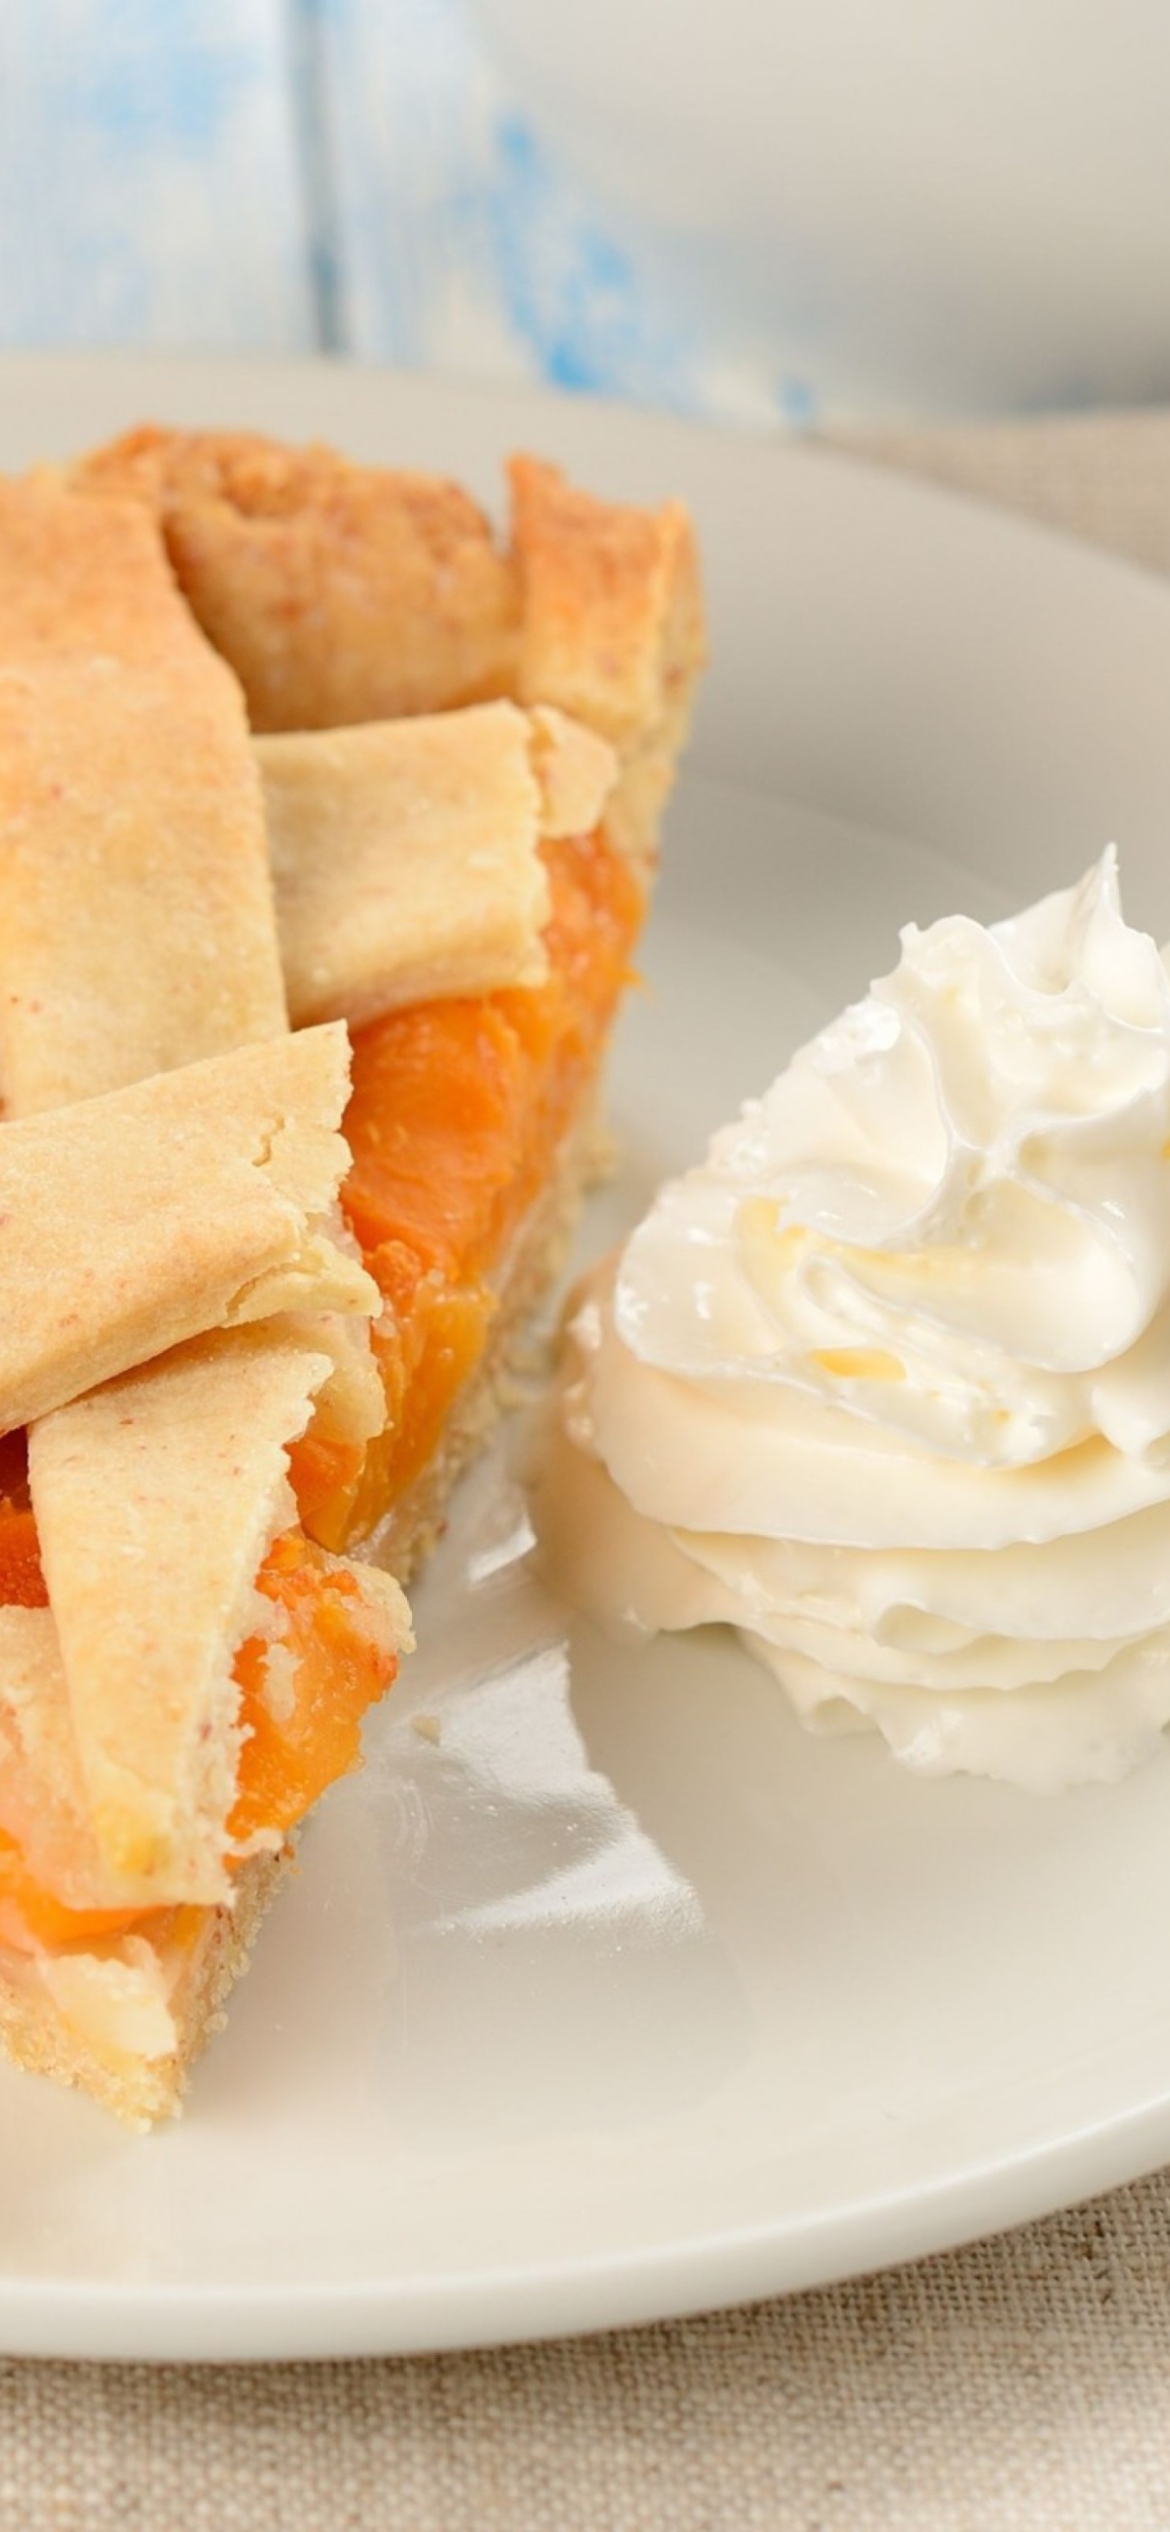 Das Apricot Pie With Whipped Cream Wallpaper 1170x2532